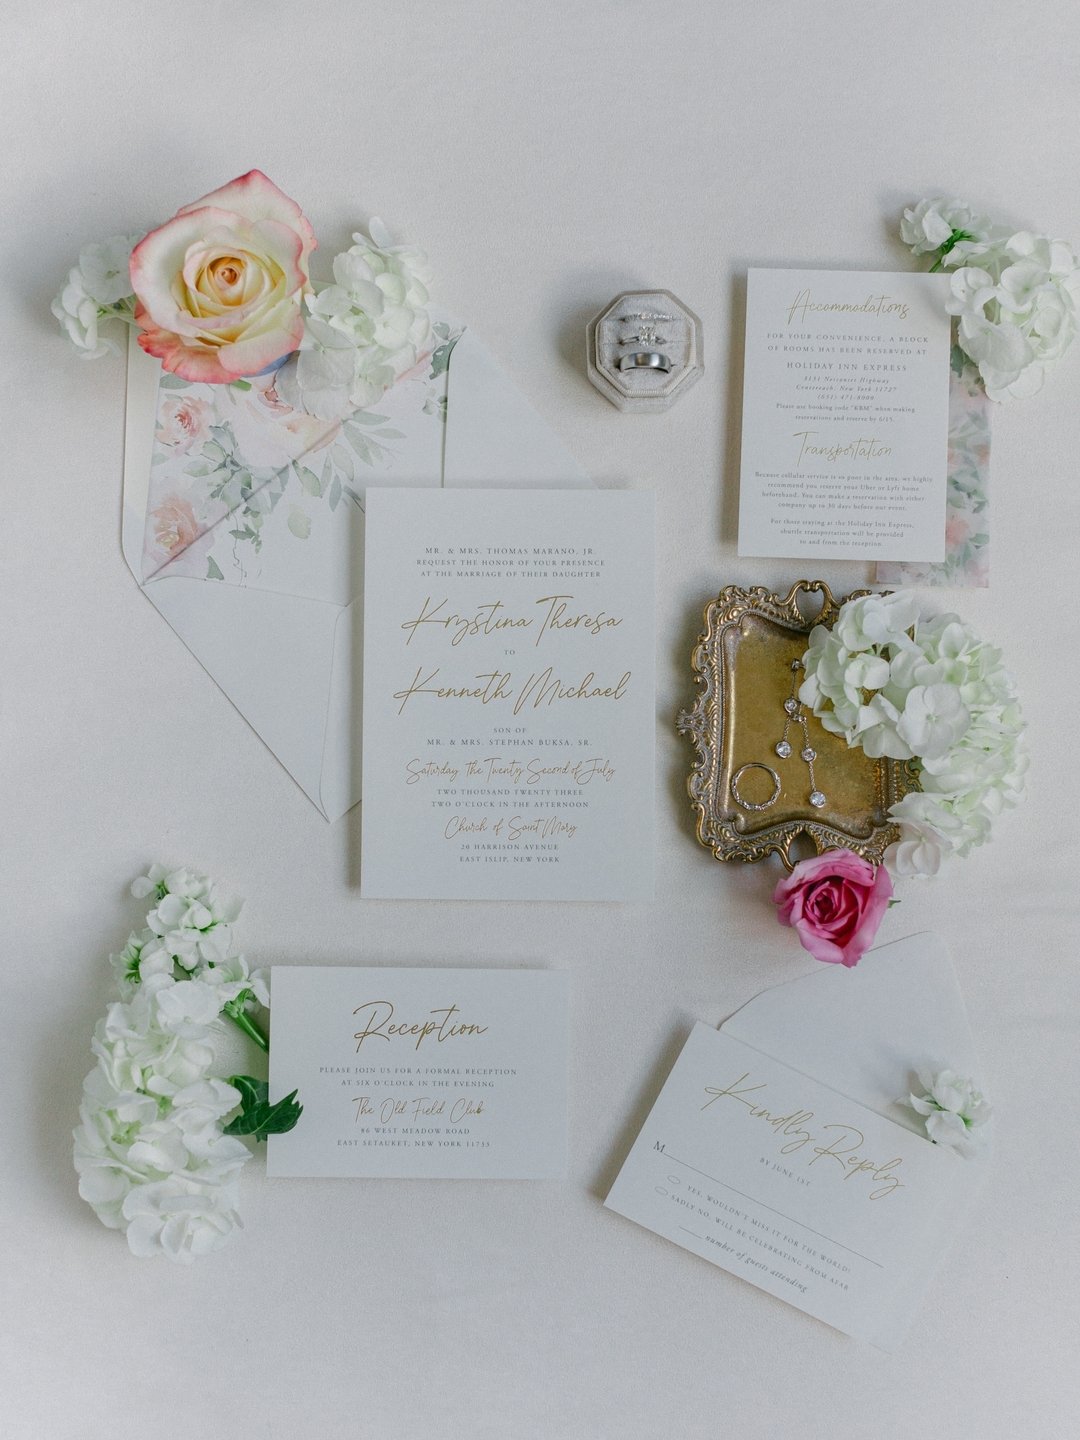 On your special day, every little thing counts, especially these elegant invitations to Ken and Krystina's guests' very special event that these two sent out!

Venue: @theoldfieldclub 
Planning: @Jordanmichelleevents @joannapacilio 
Photography: @jes